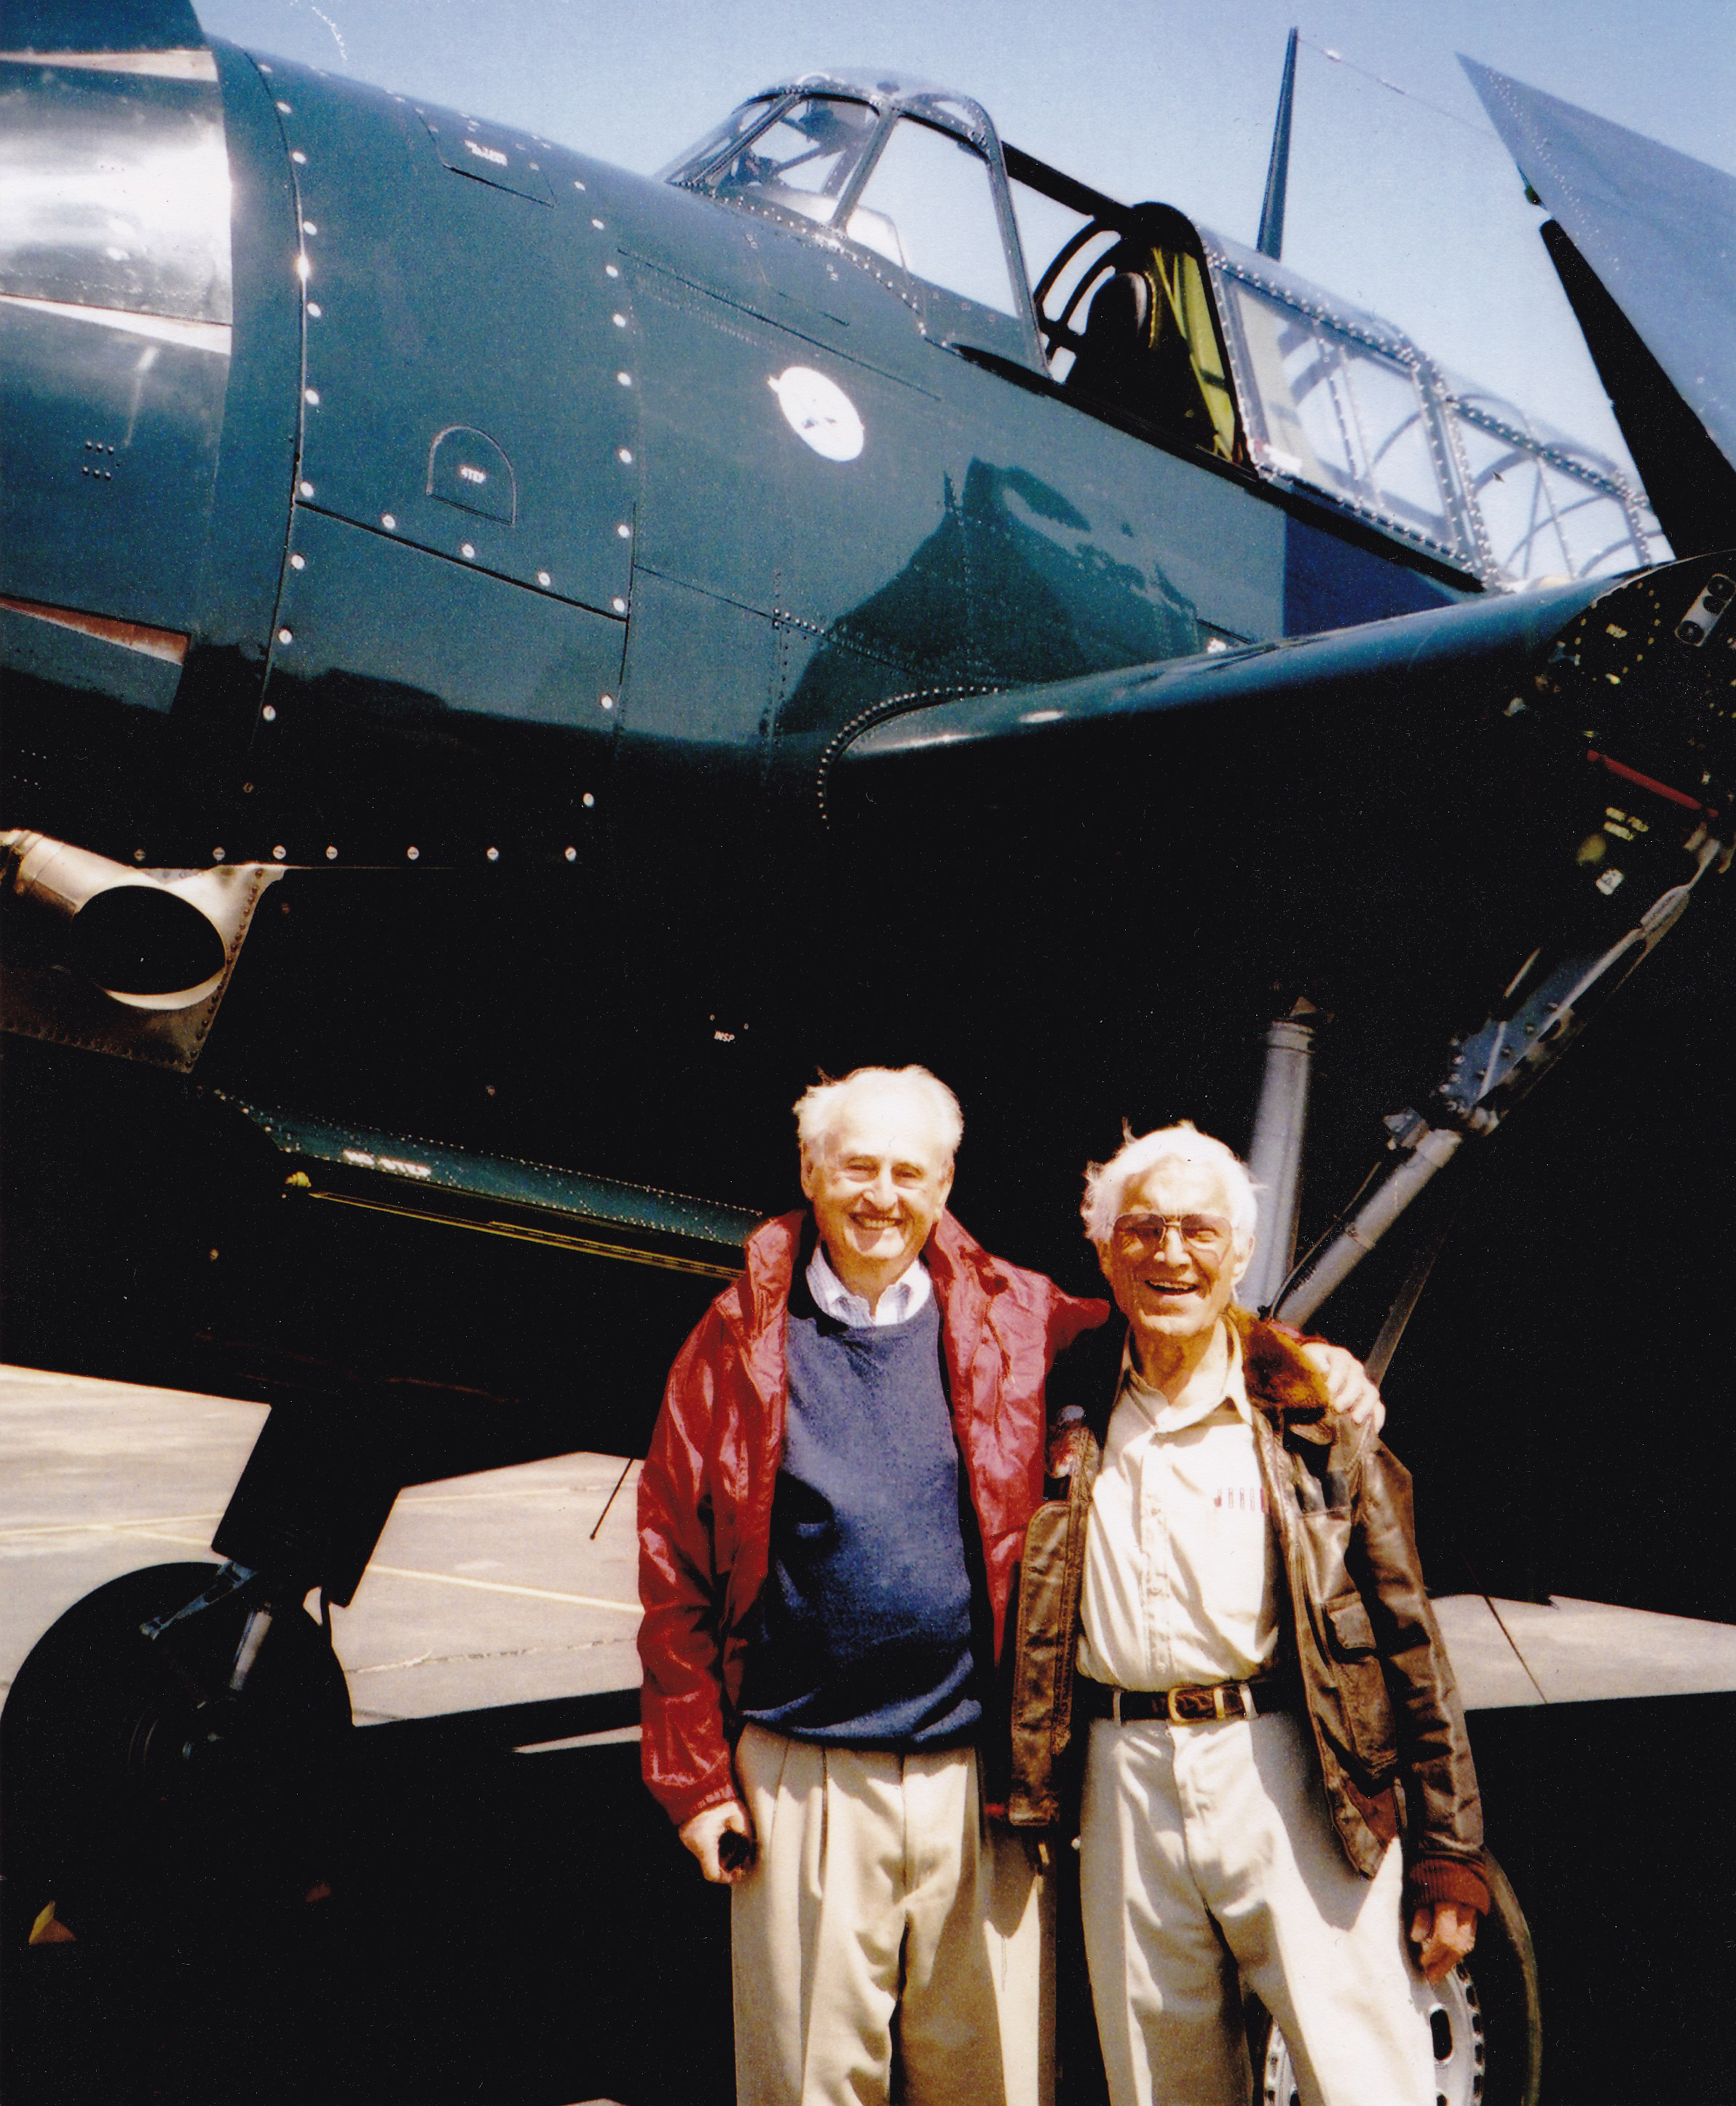 You can also buy a ride for a veteran. My friend, the late Robbie Robinson (at left), a TBM Avenger pilot in WWII, got a ride in a TBM in 2005 here in Idaho. “It brought back a lot of memories, good and bad!” he said. But he talked about that ride for the rest of his life. He is pictured here with his friend, the late Nat Adams of Boise, Idaho, who piloted a Hellcat during WWII, earned the Distinguished Flying Cross (twice!) plus other medals, and saved the life of George H.W. Bush after Bush was shot down. Photo courtesy Robbie Robinson.